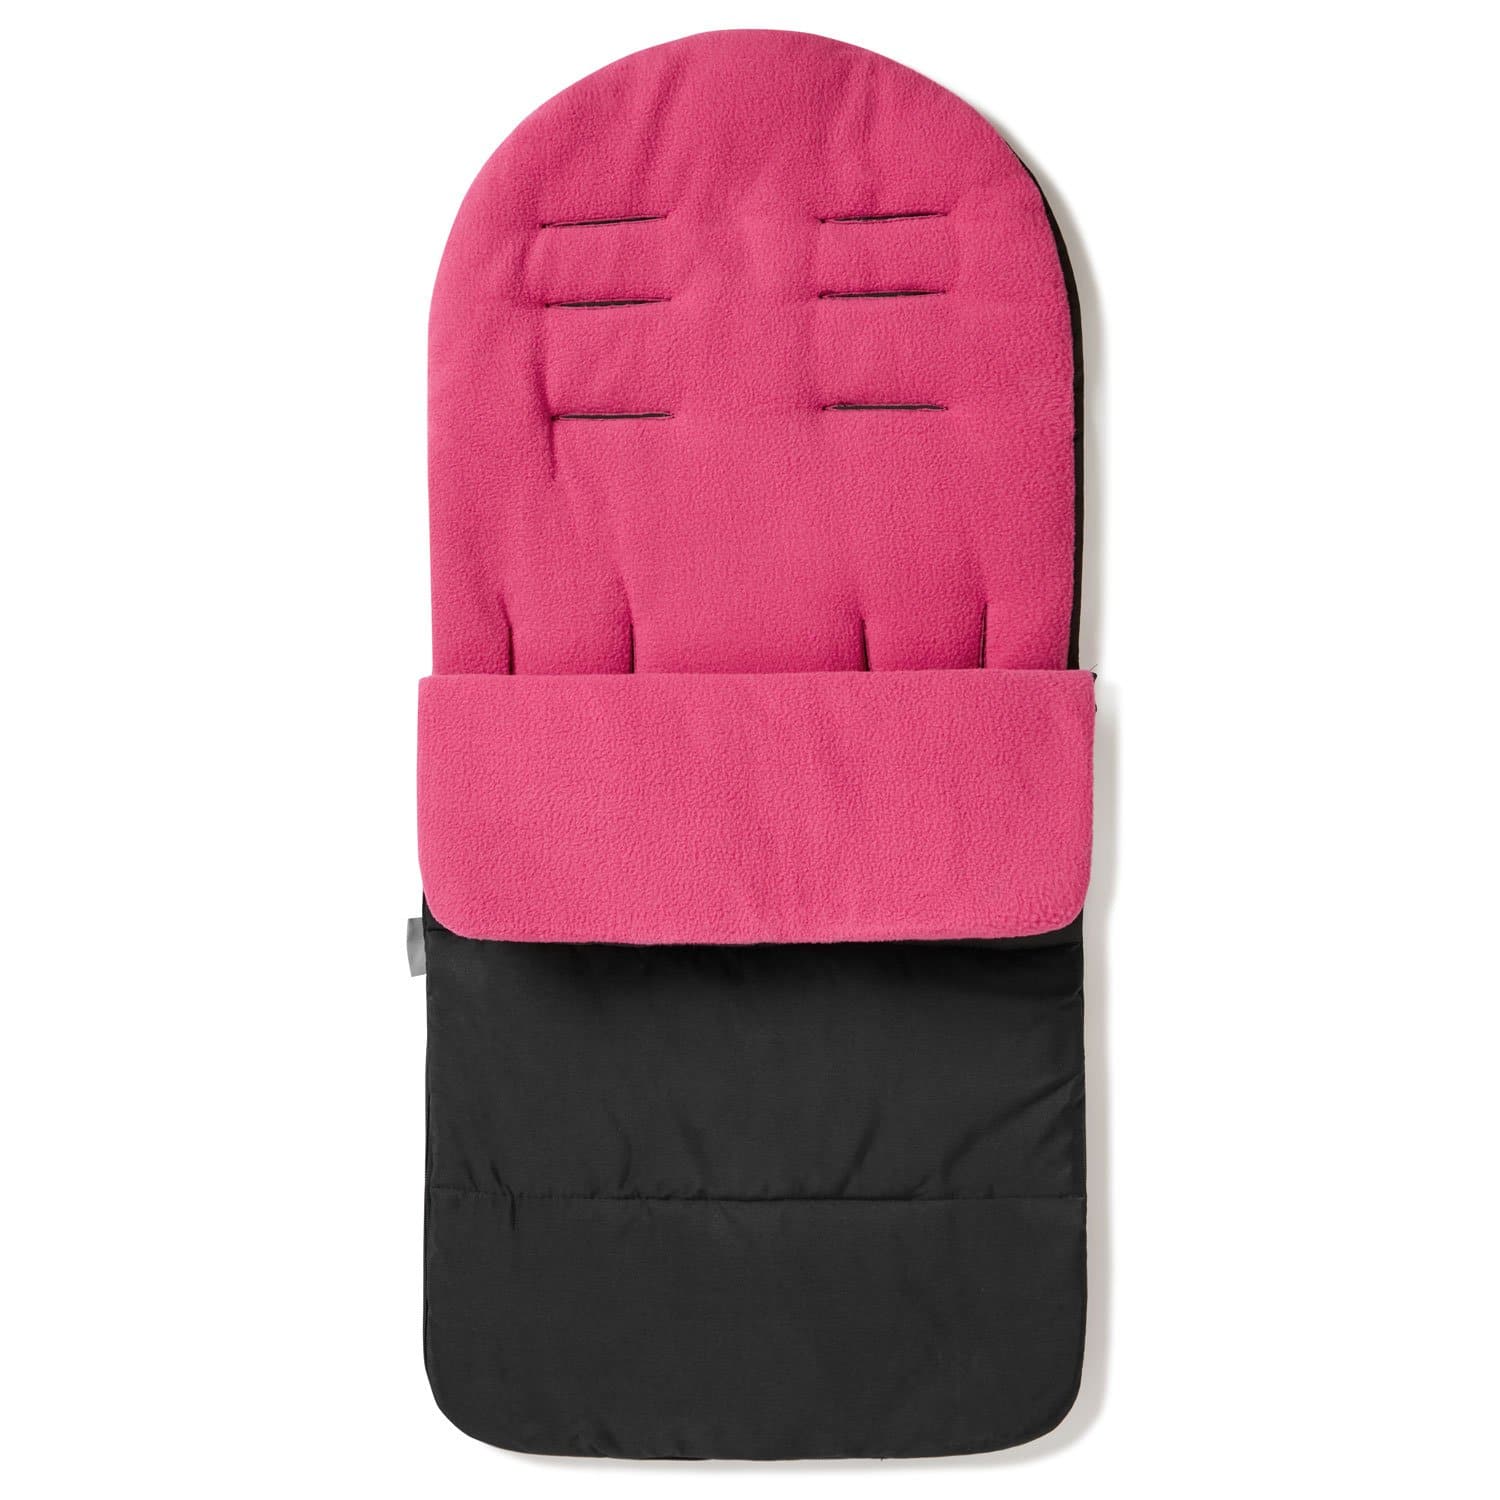 Premium Footmuff / Cosy Toes Compatible with Bugaboo - Pink Rose / Fits All Models | For Your Little One